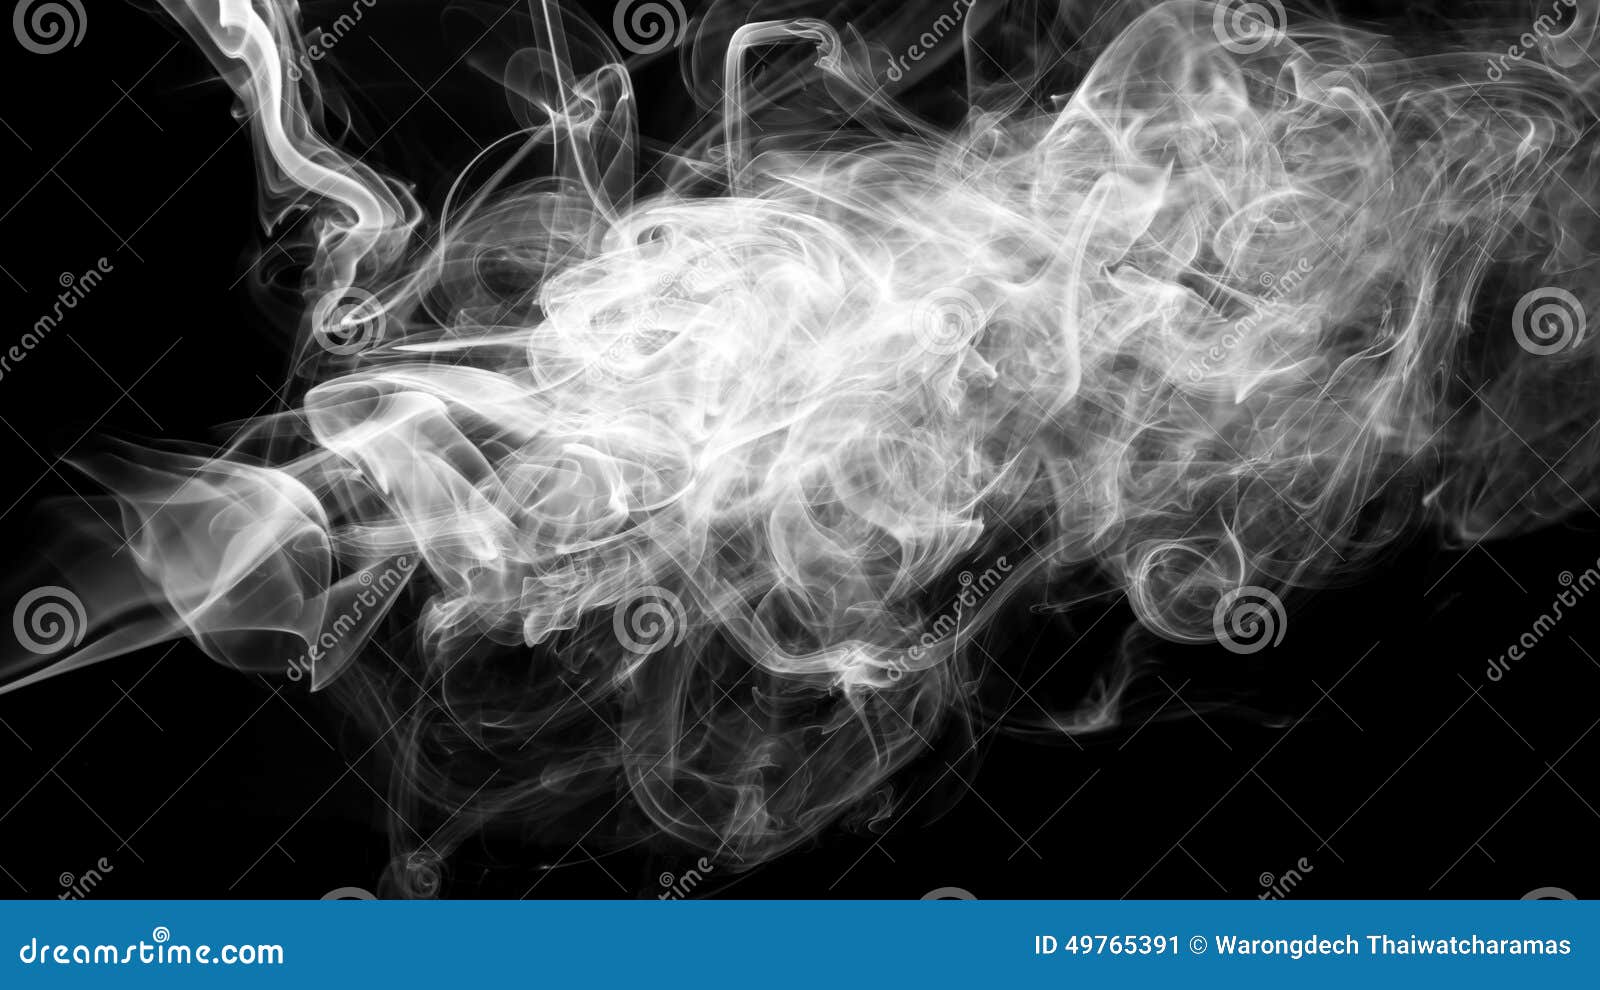 Abstract White Smoke on Black Background Stock Image - Image of backdrop,  smooth: 49765391